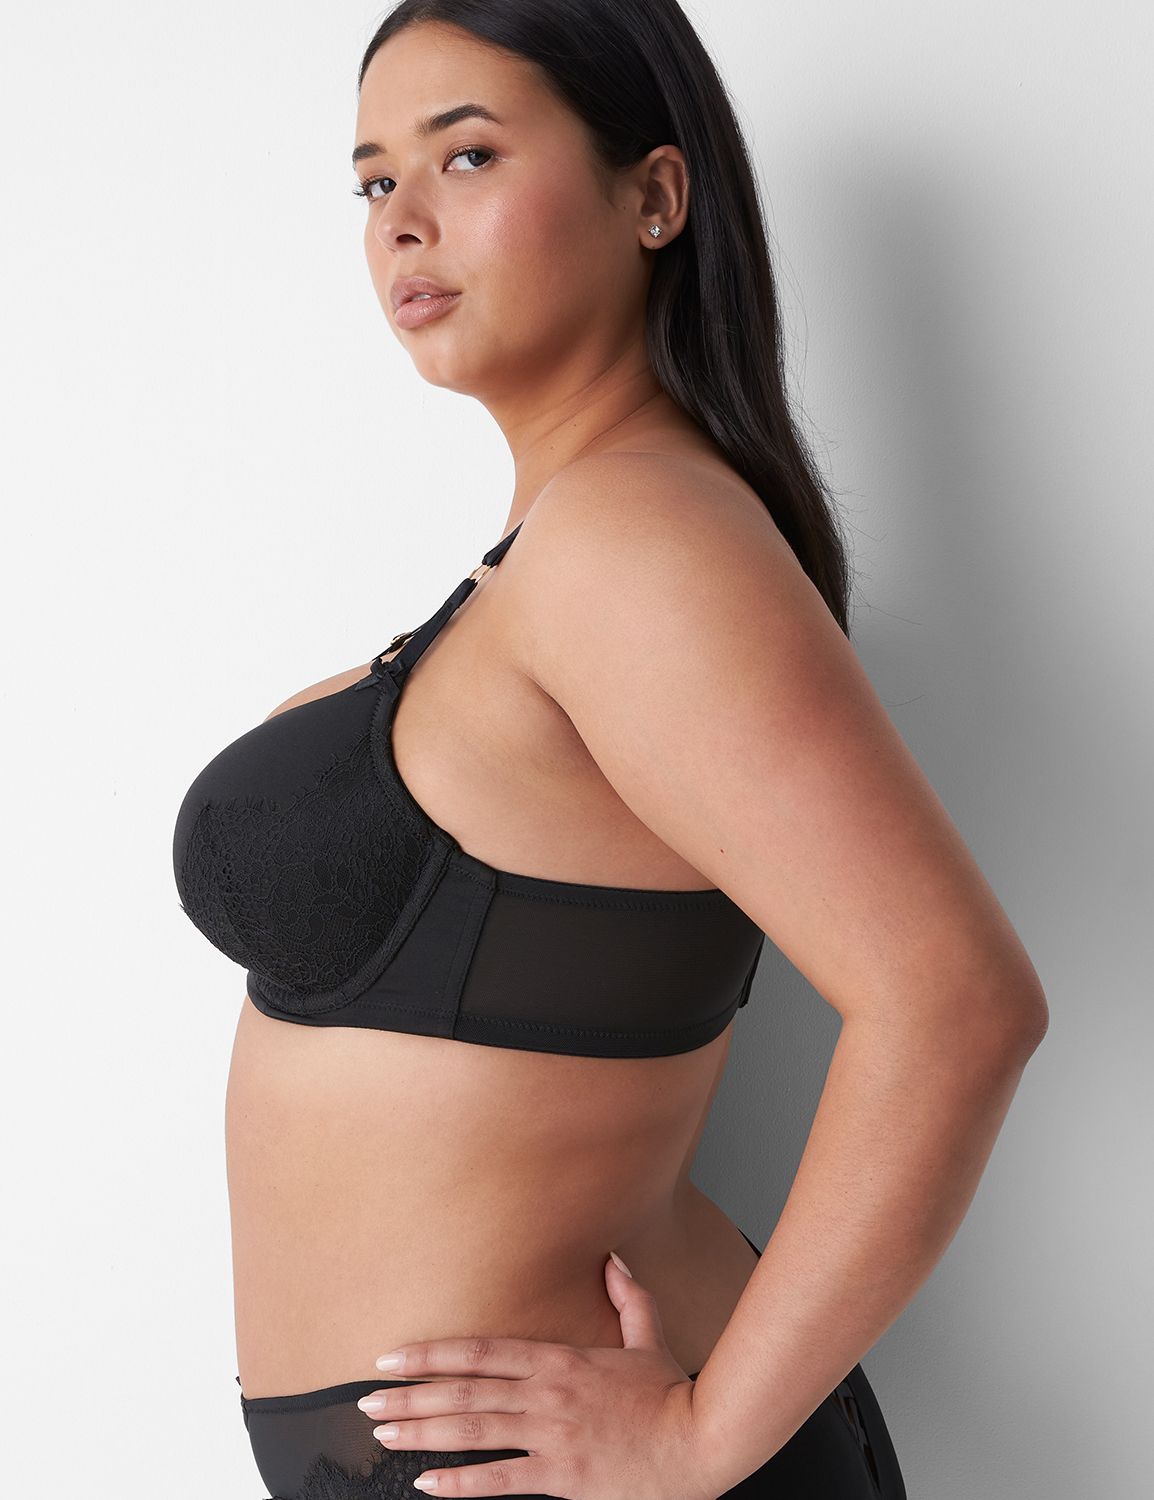 Cacique Black Balconette Bra Size undefined - $35 New With Tags - From  Kristine